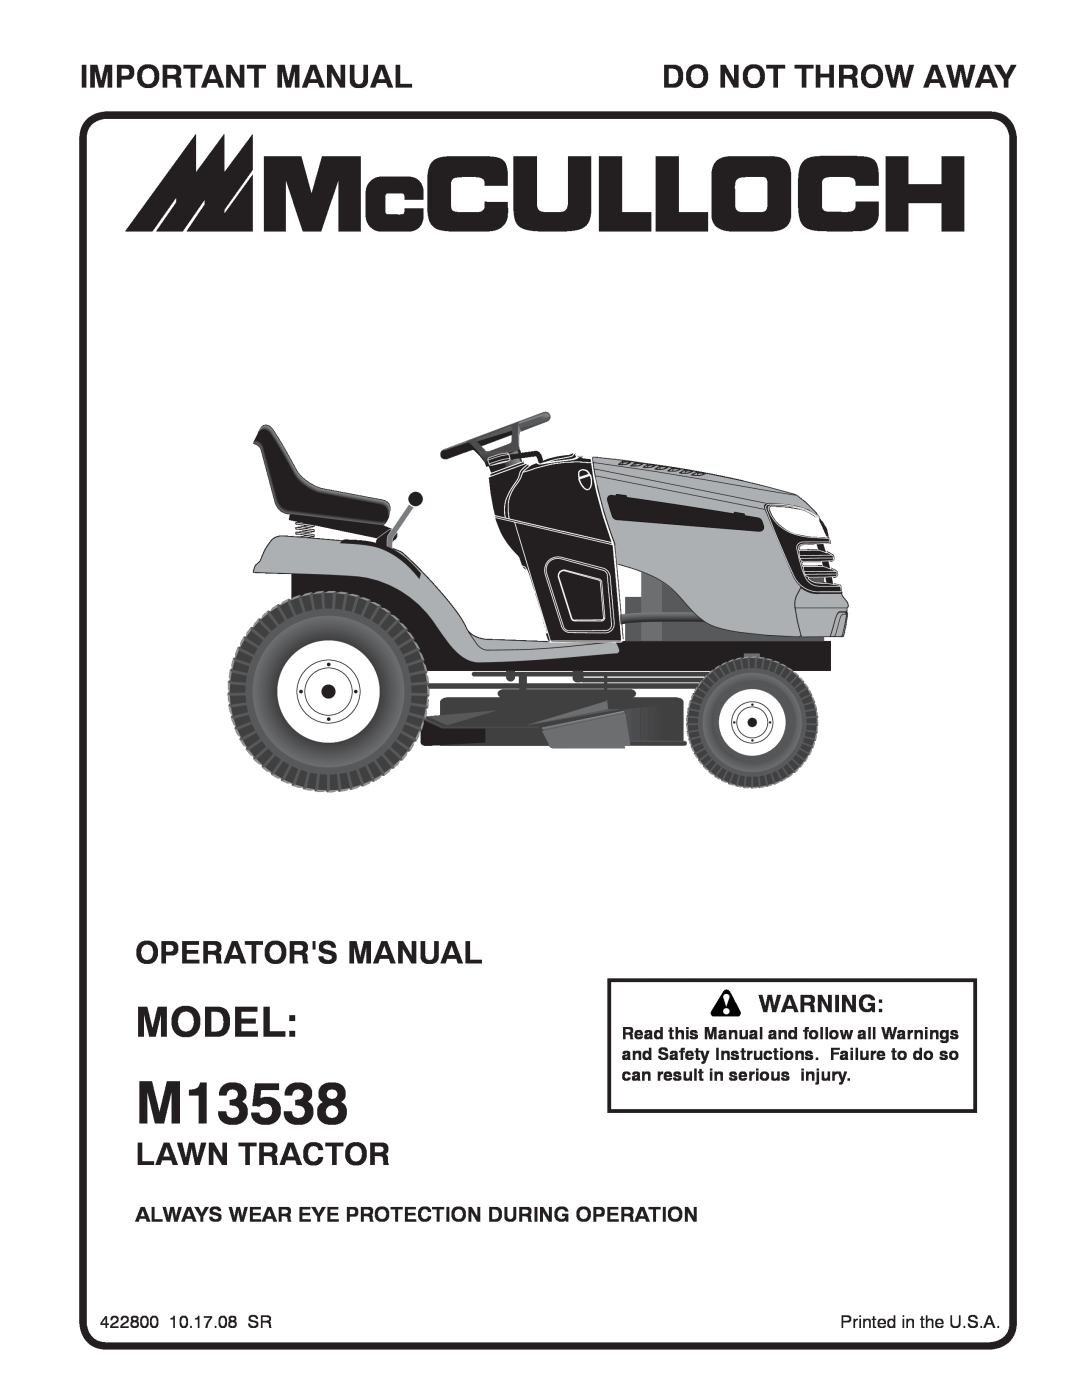 McCulloch 422800 manual Always Wear Eye Protection During Operation, M13538, Model, Important Manual, Do Not Throw Away 